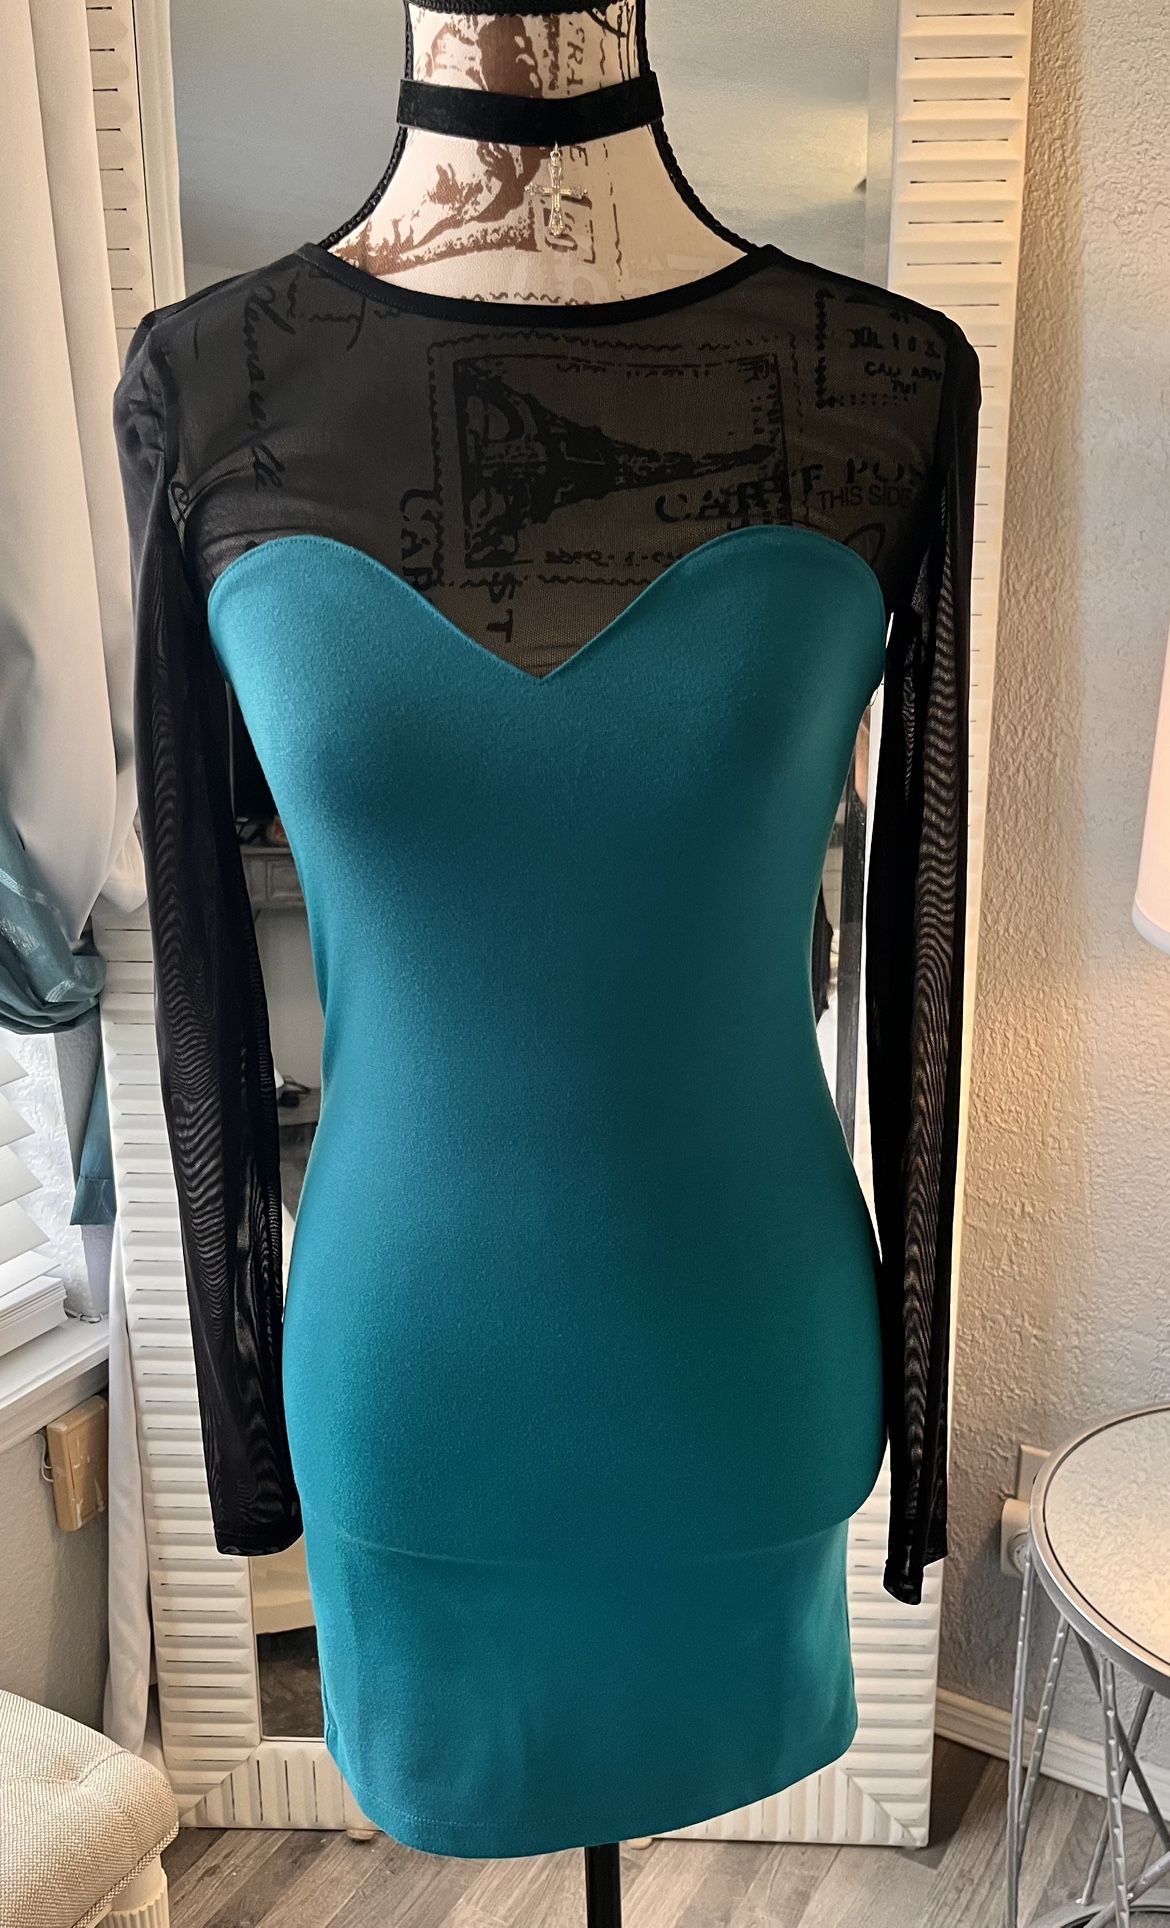 Teal And Black Sexy Dress  Size Small $35